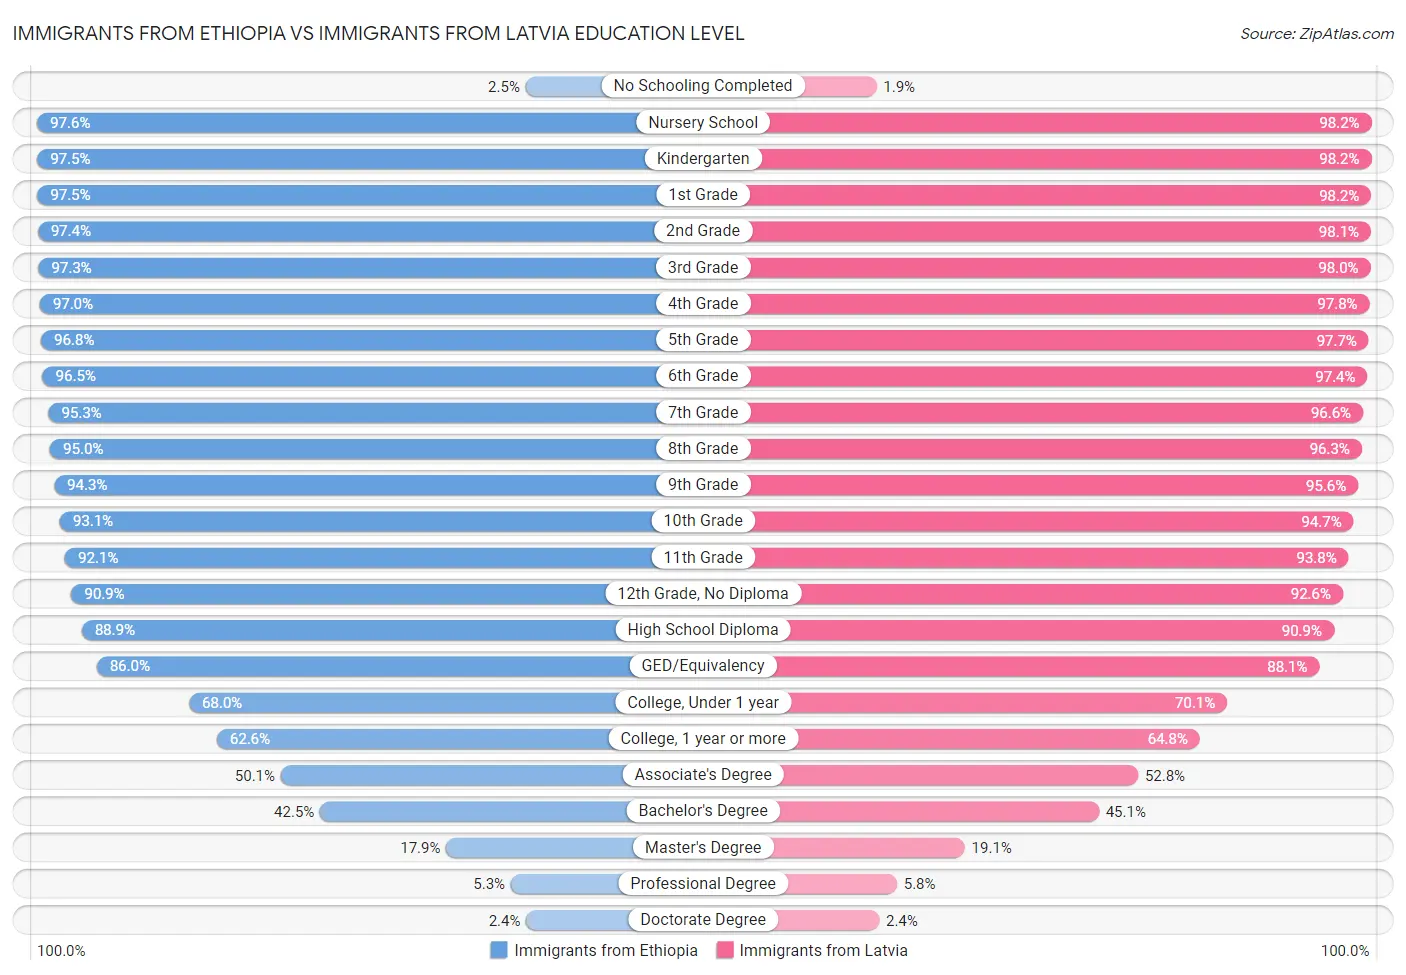 Immigrants from Ethiopia vs Immigrants from Latvia Education Level